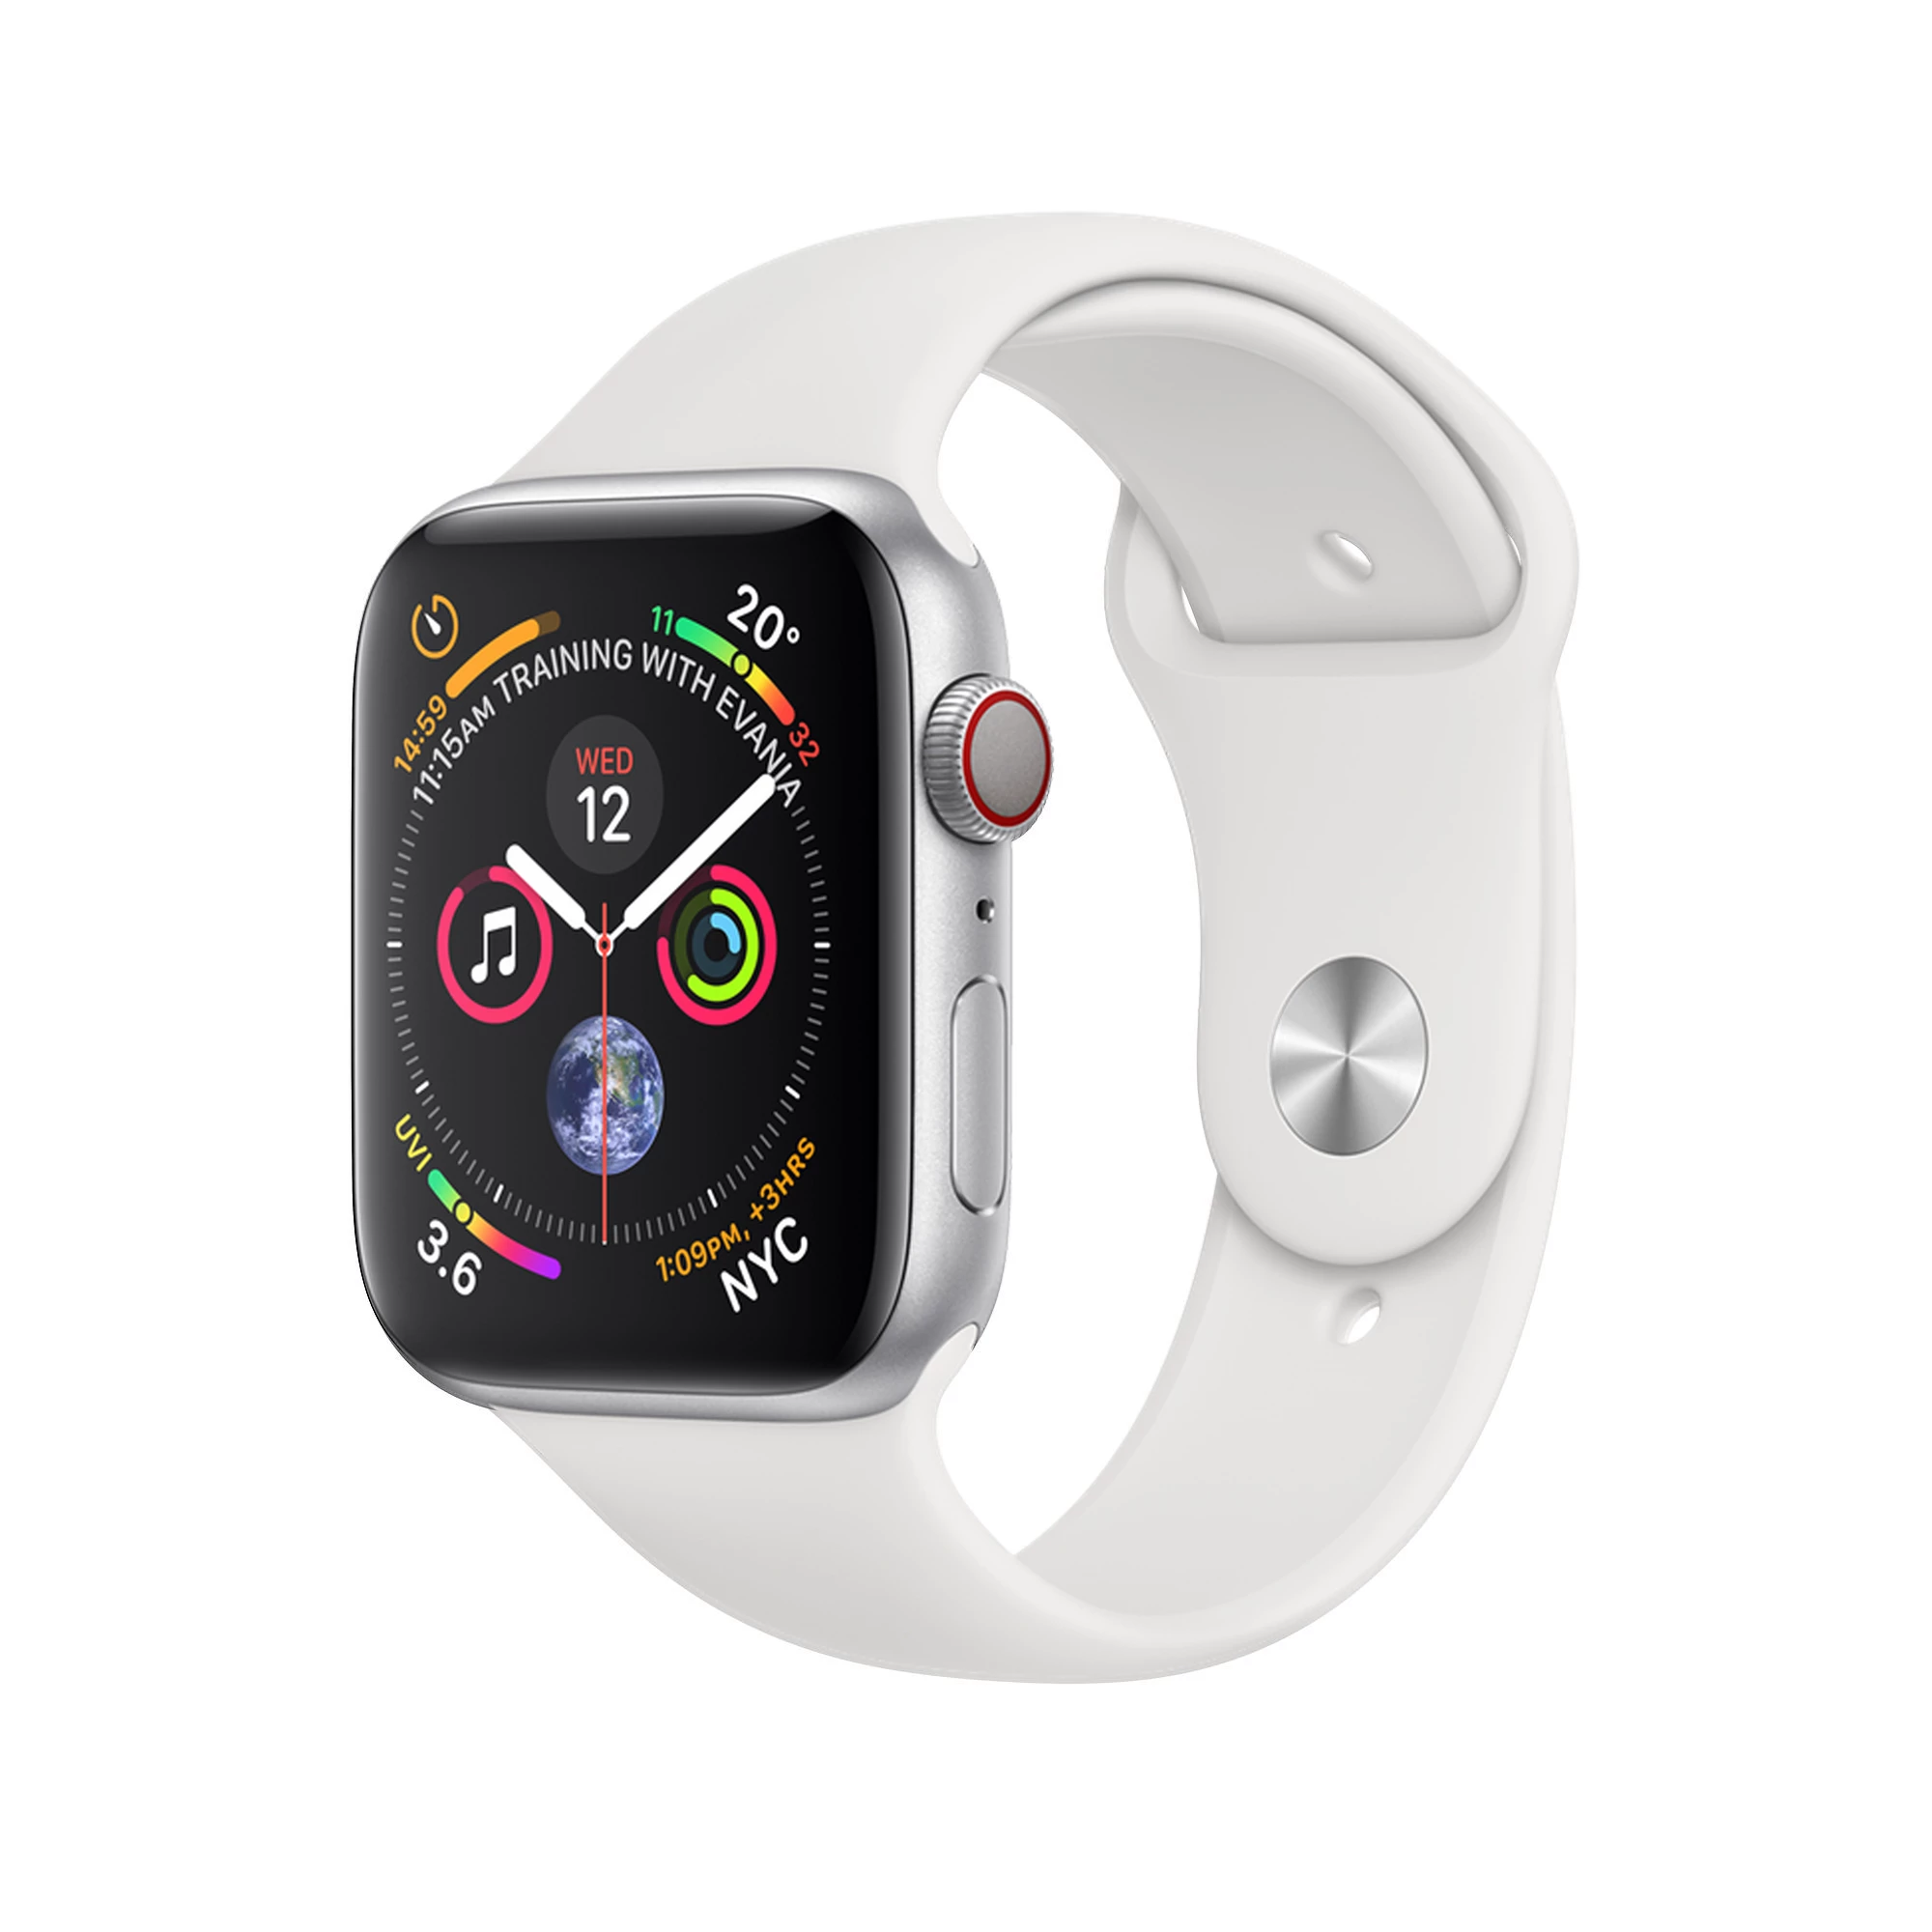 Apple Watch Series 4 (GPS + Cellular) 40mm Silver Aluminum Case with White Sport Band (MTUD2, MTVA2)